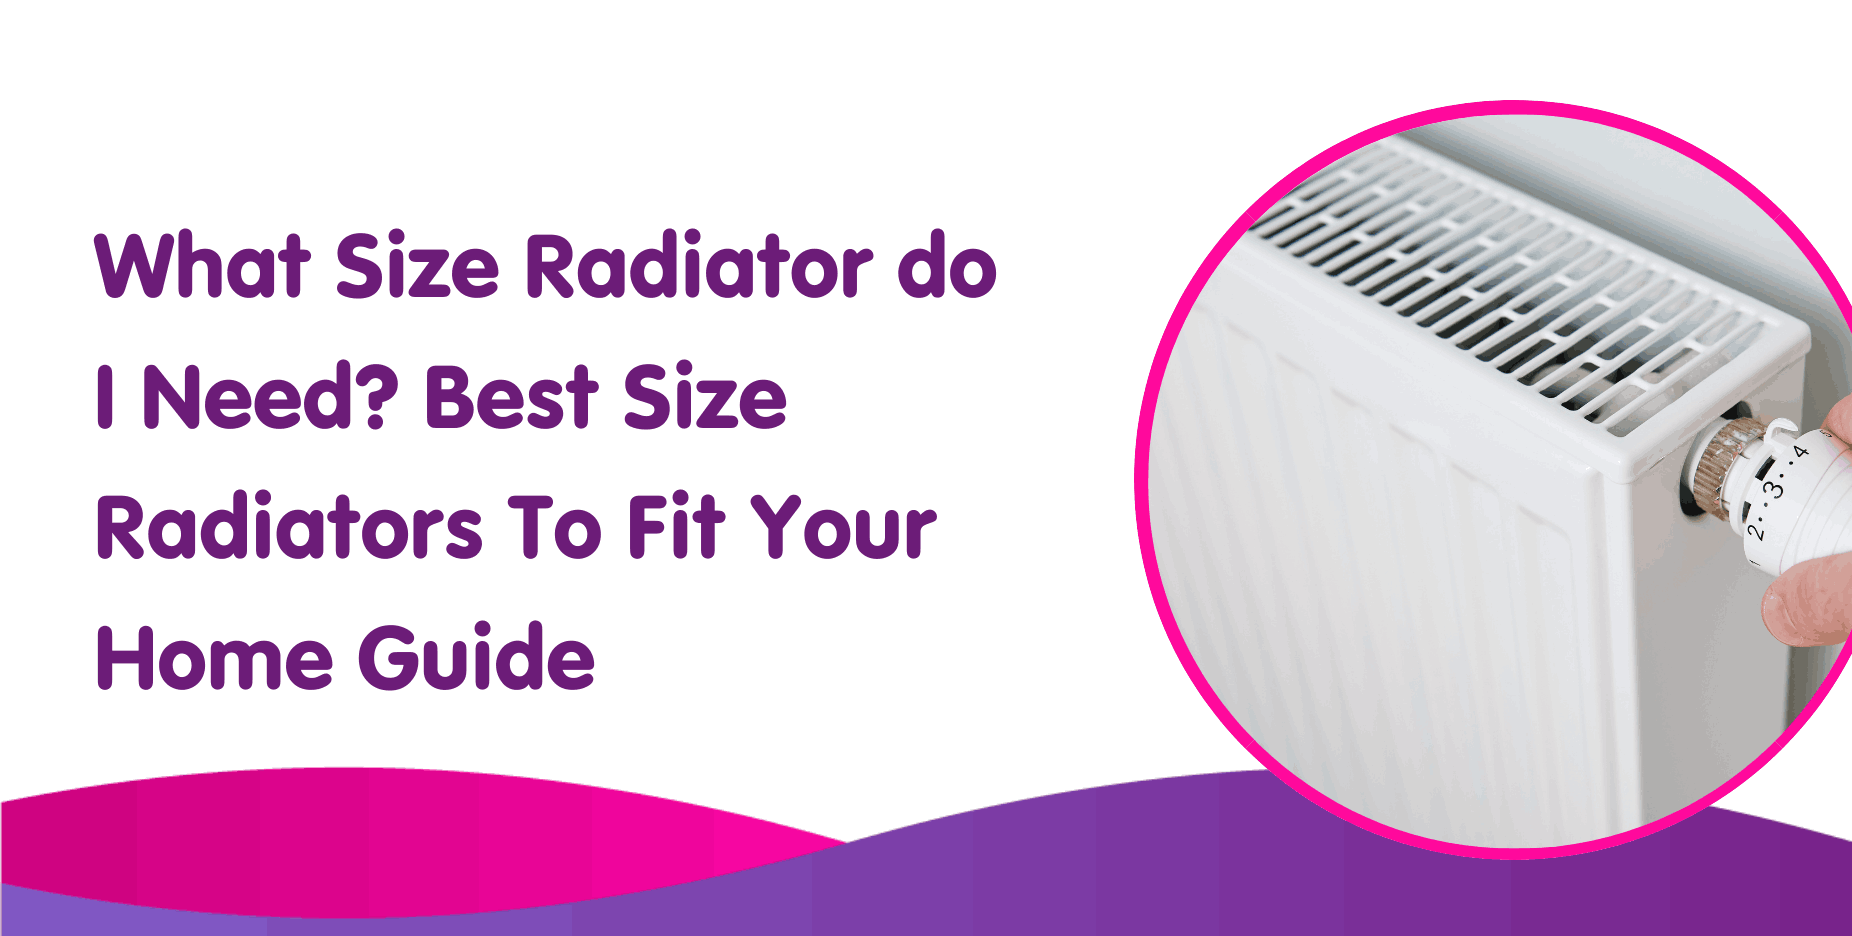 What Size Radiator do I Need? Best Size Radiators To Fit Your Home Guide